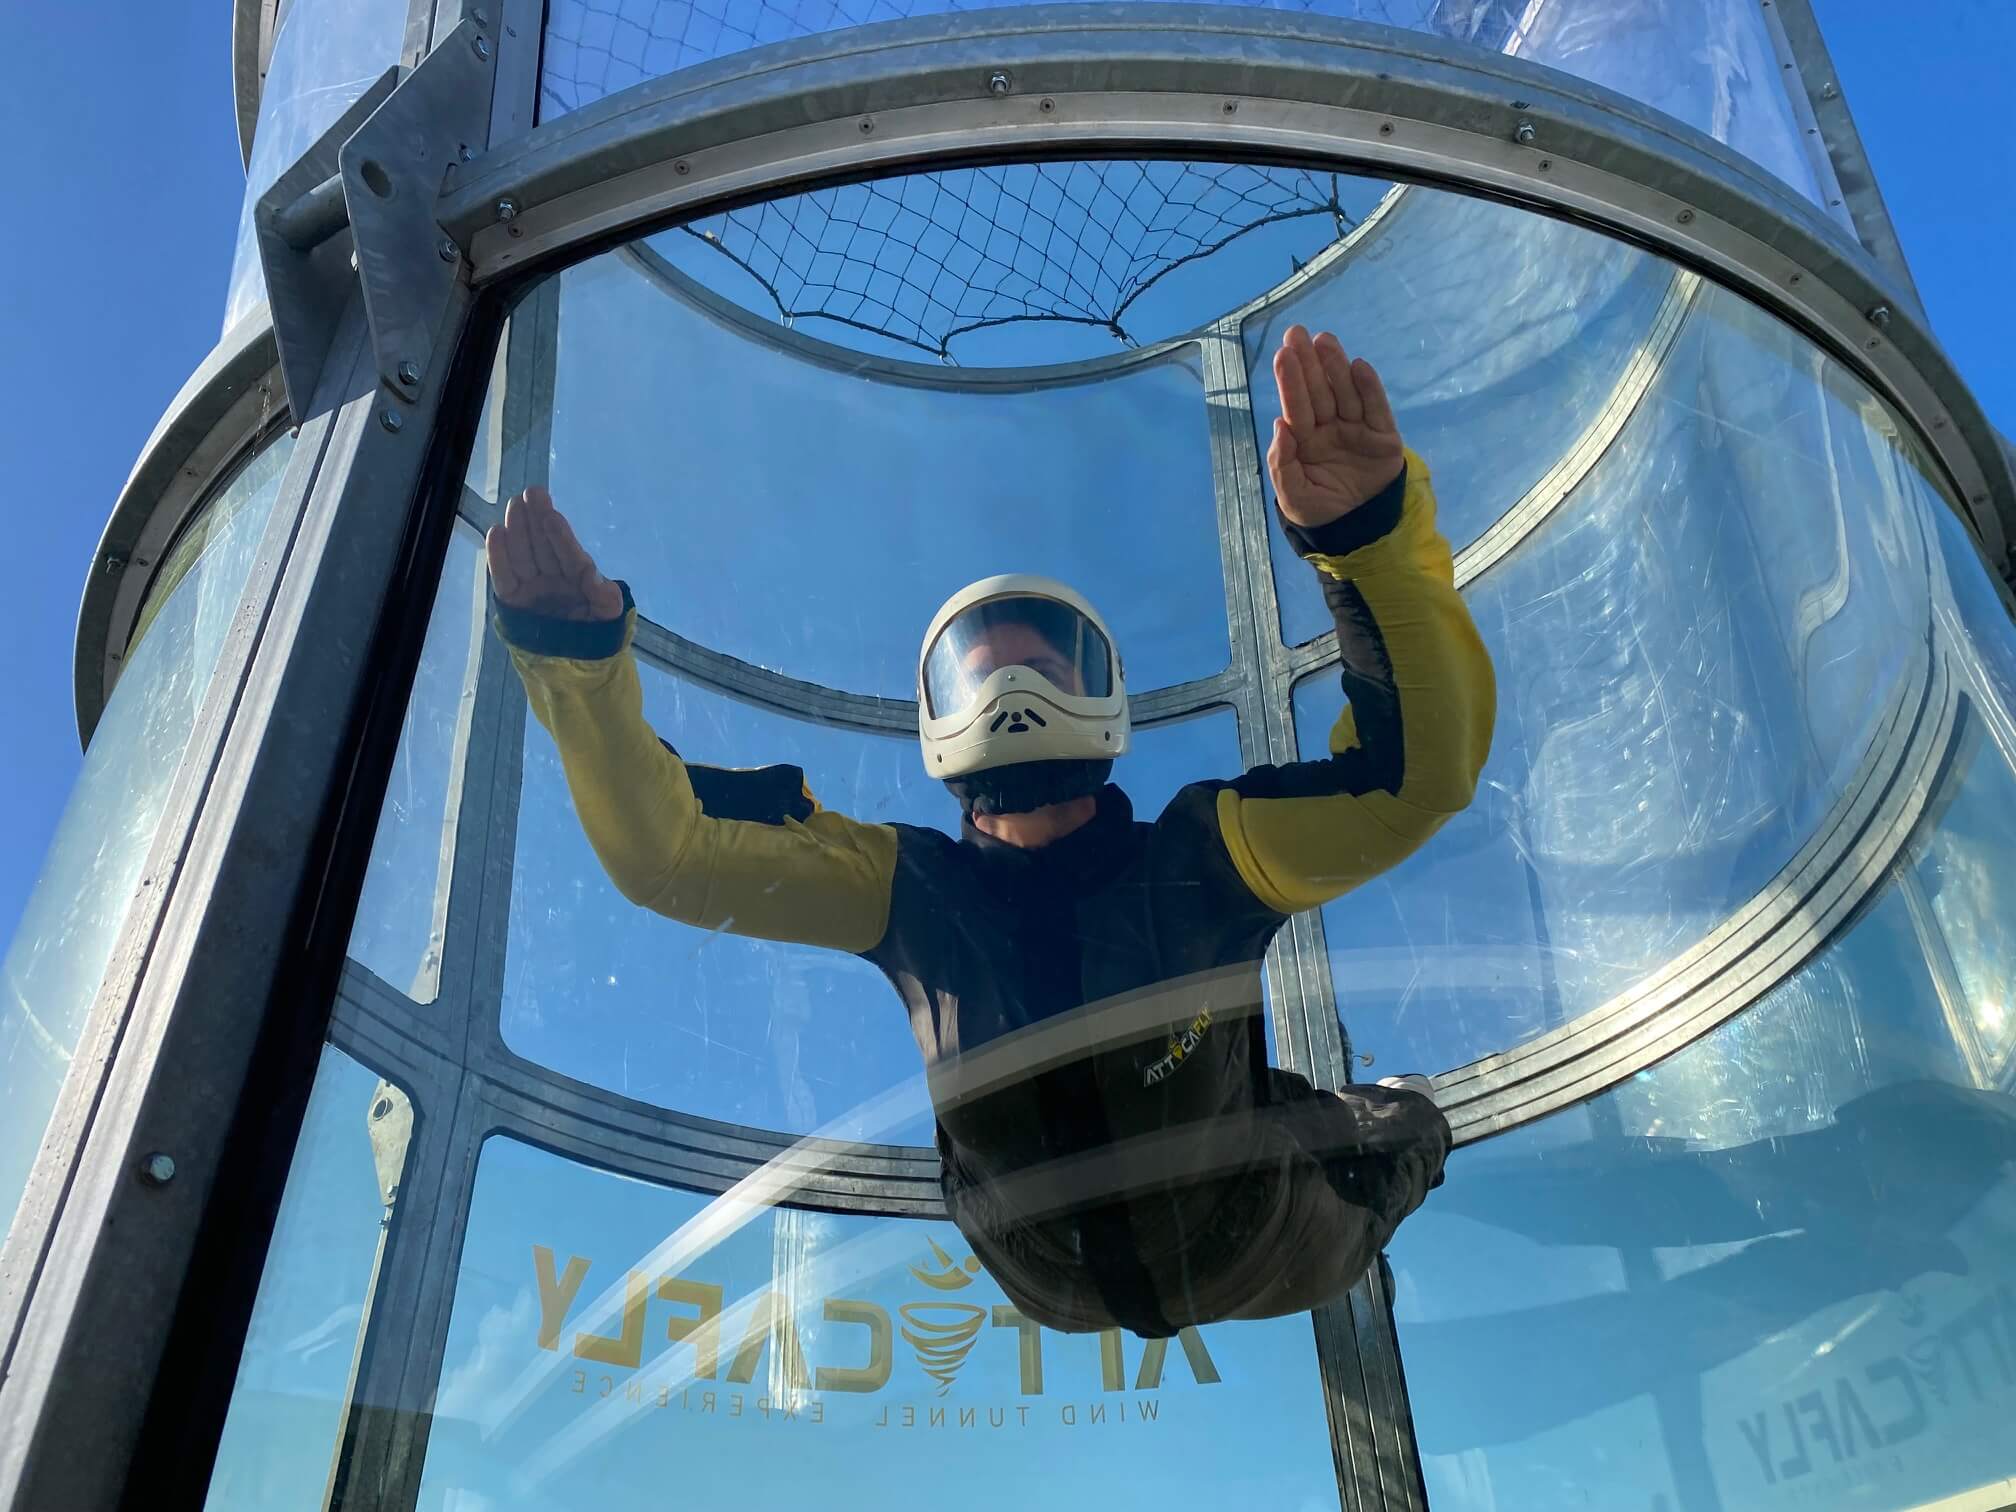 What to Wear Indoor Skydiving: First timers Guide